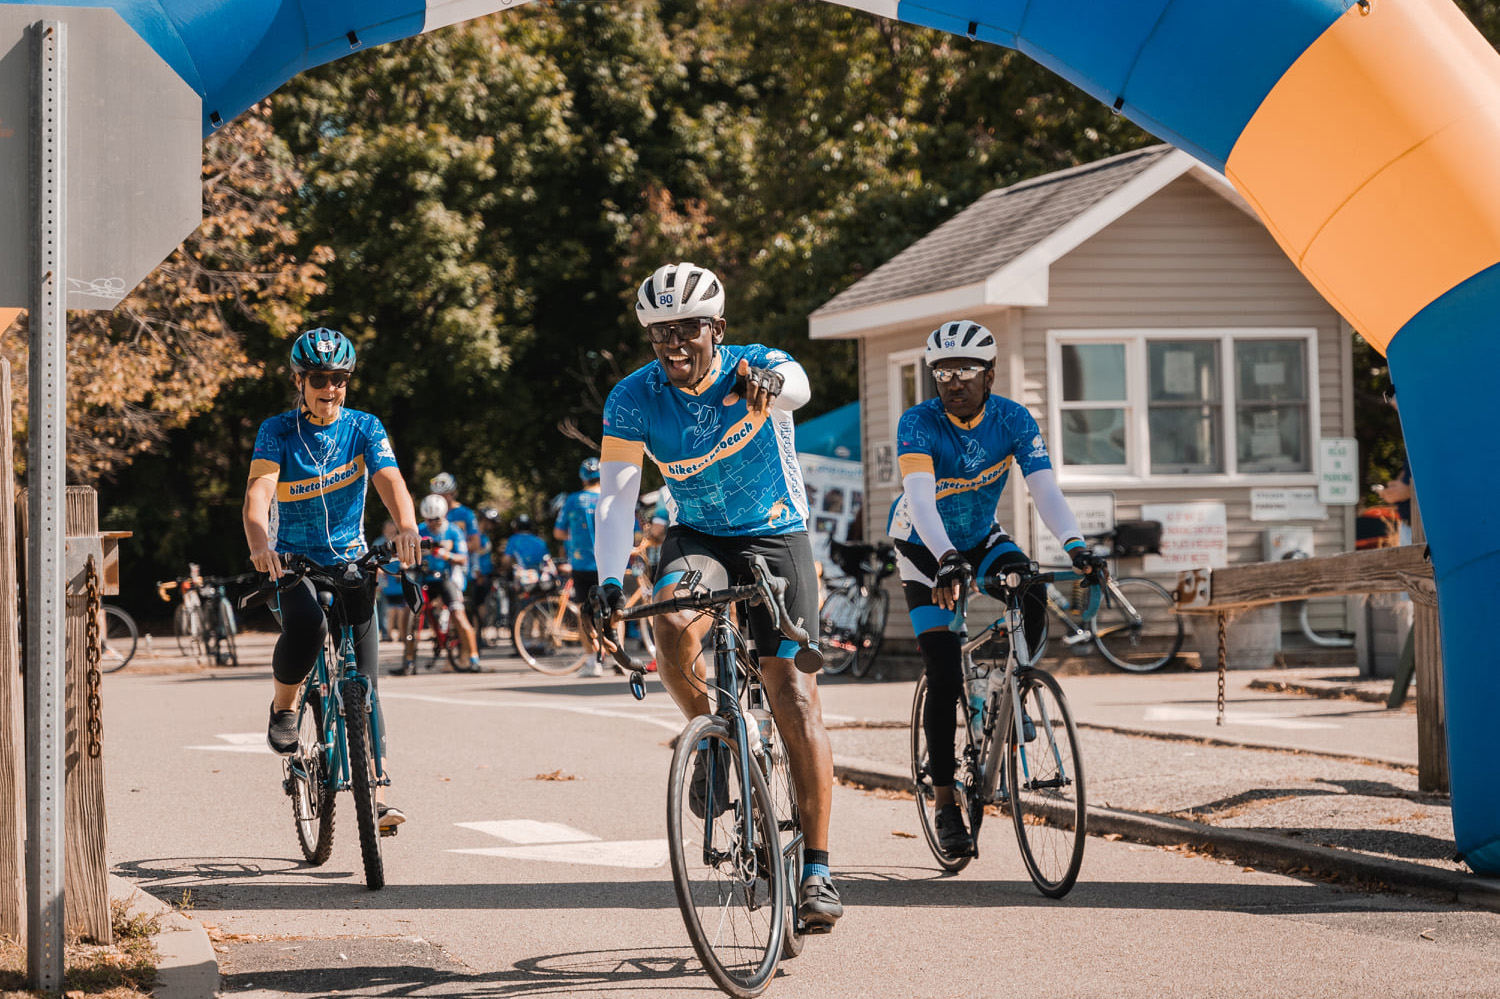 The Washington DC Ride for AUTISM & disABILITIES